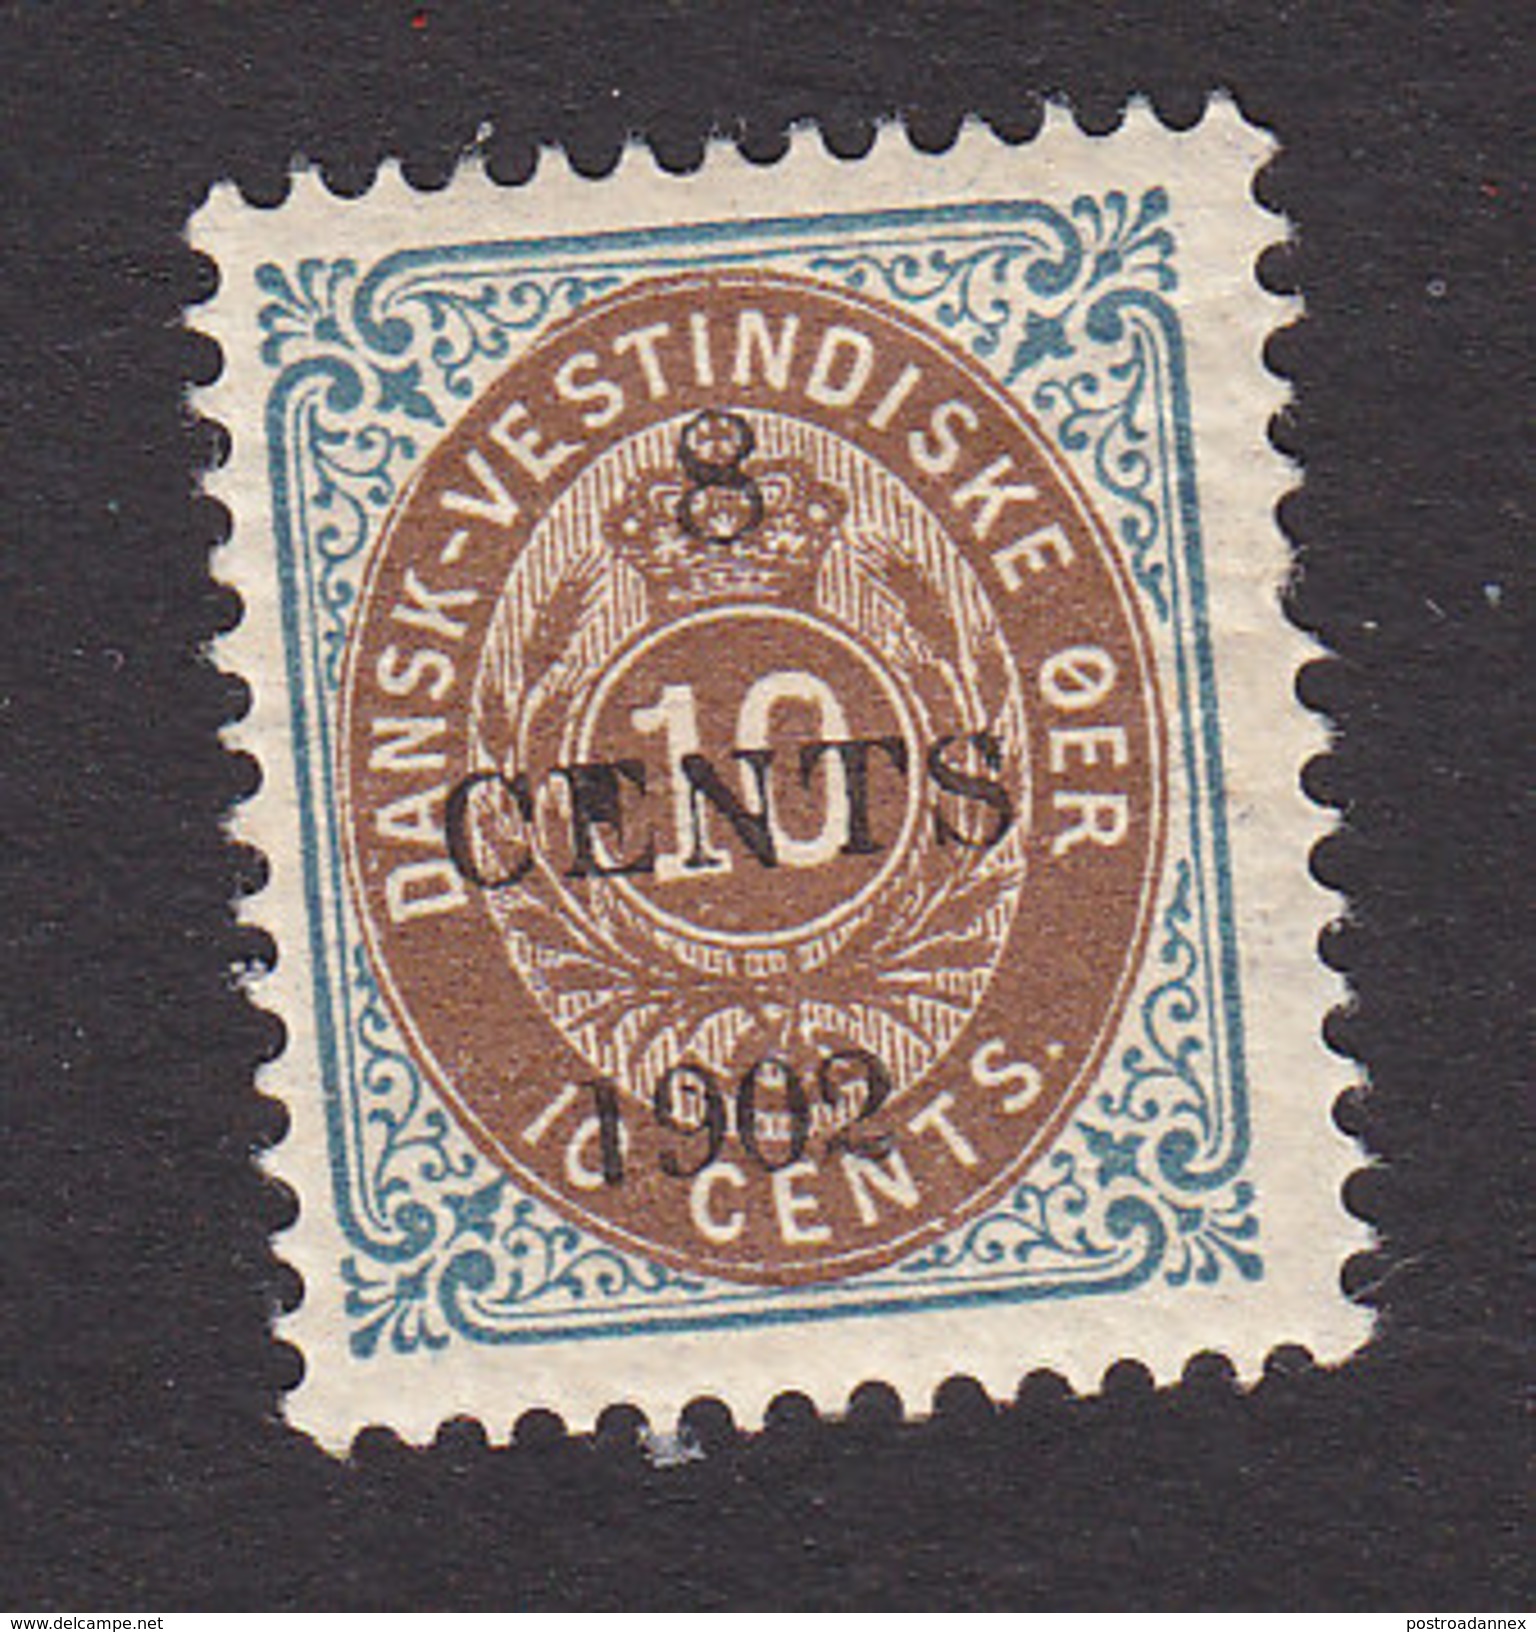 Danish West Indies, Scott #25, Mint Hinged, Number Surcharged, Issued 1902 - Denmark (West Indies)